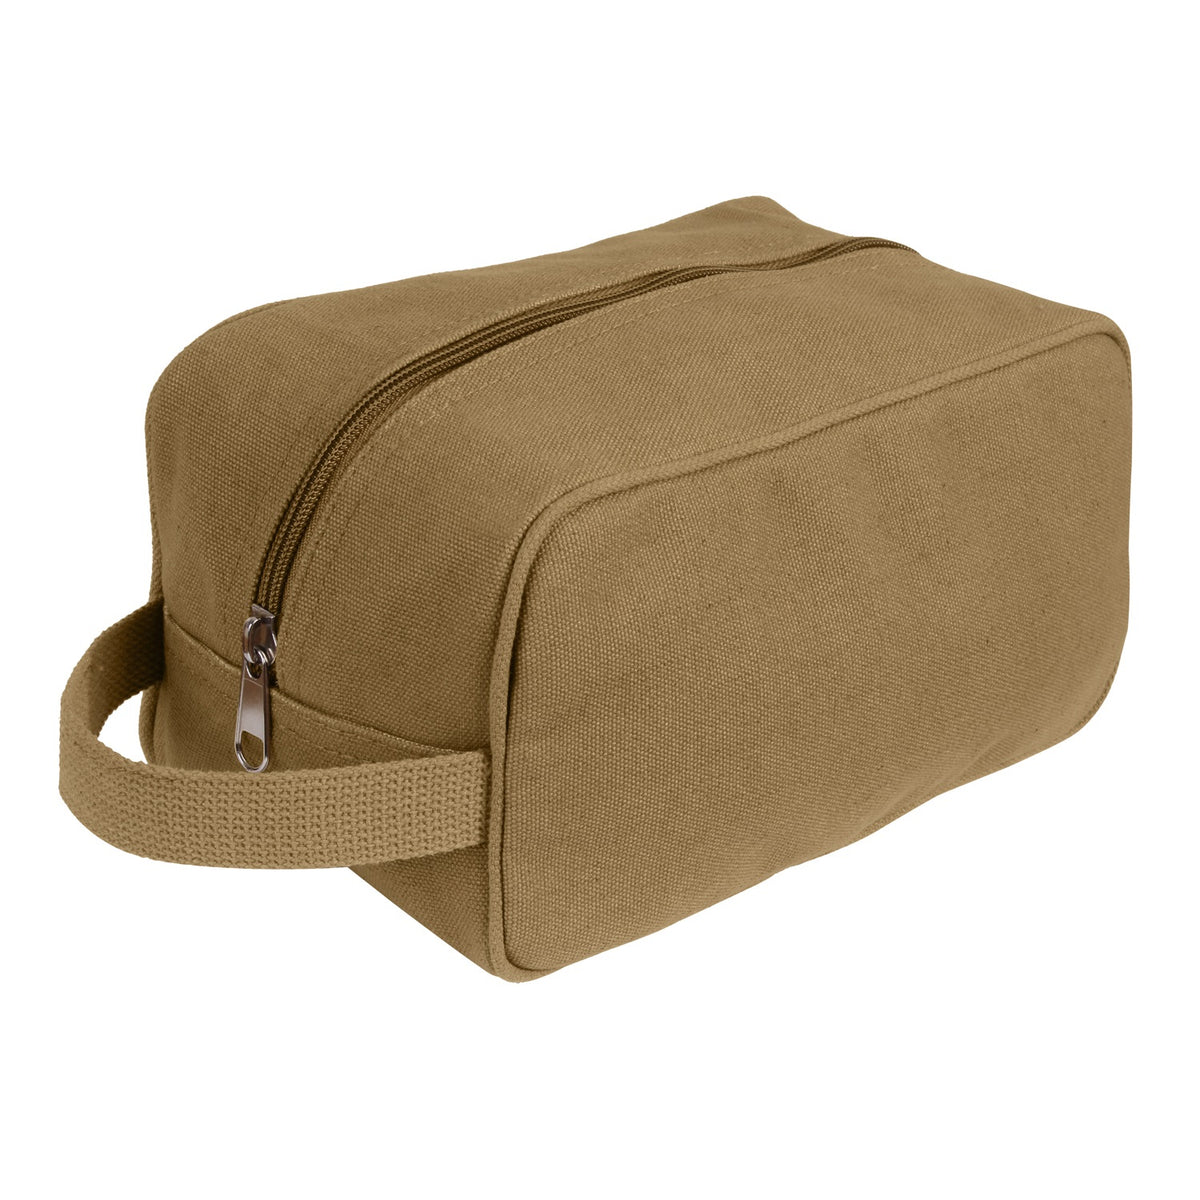 Rothco Canvas Travel Kit Coyote Brown